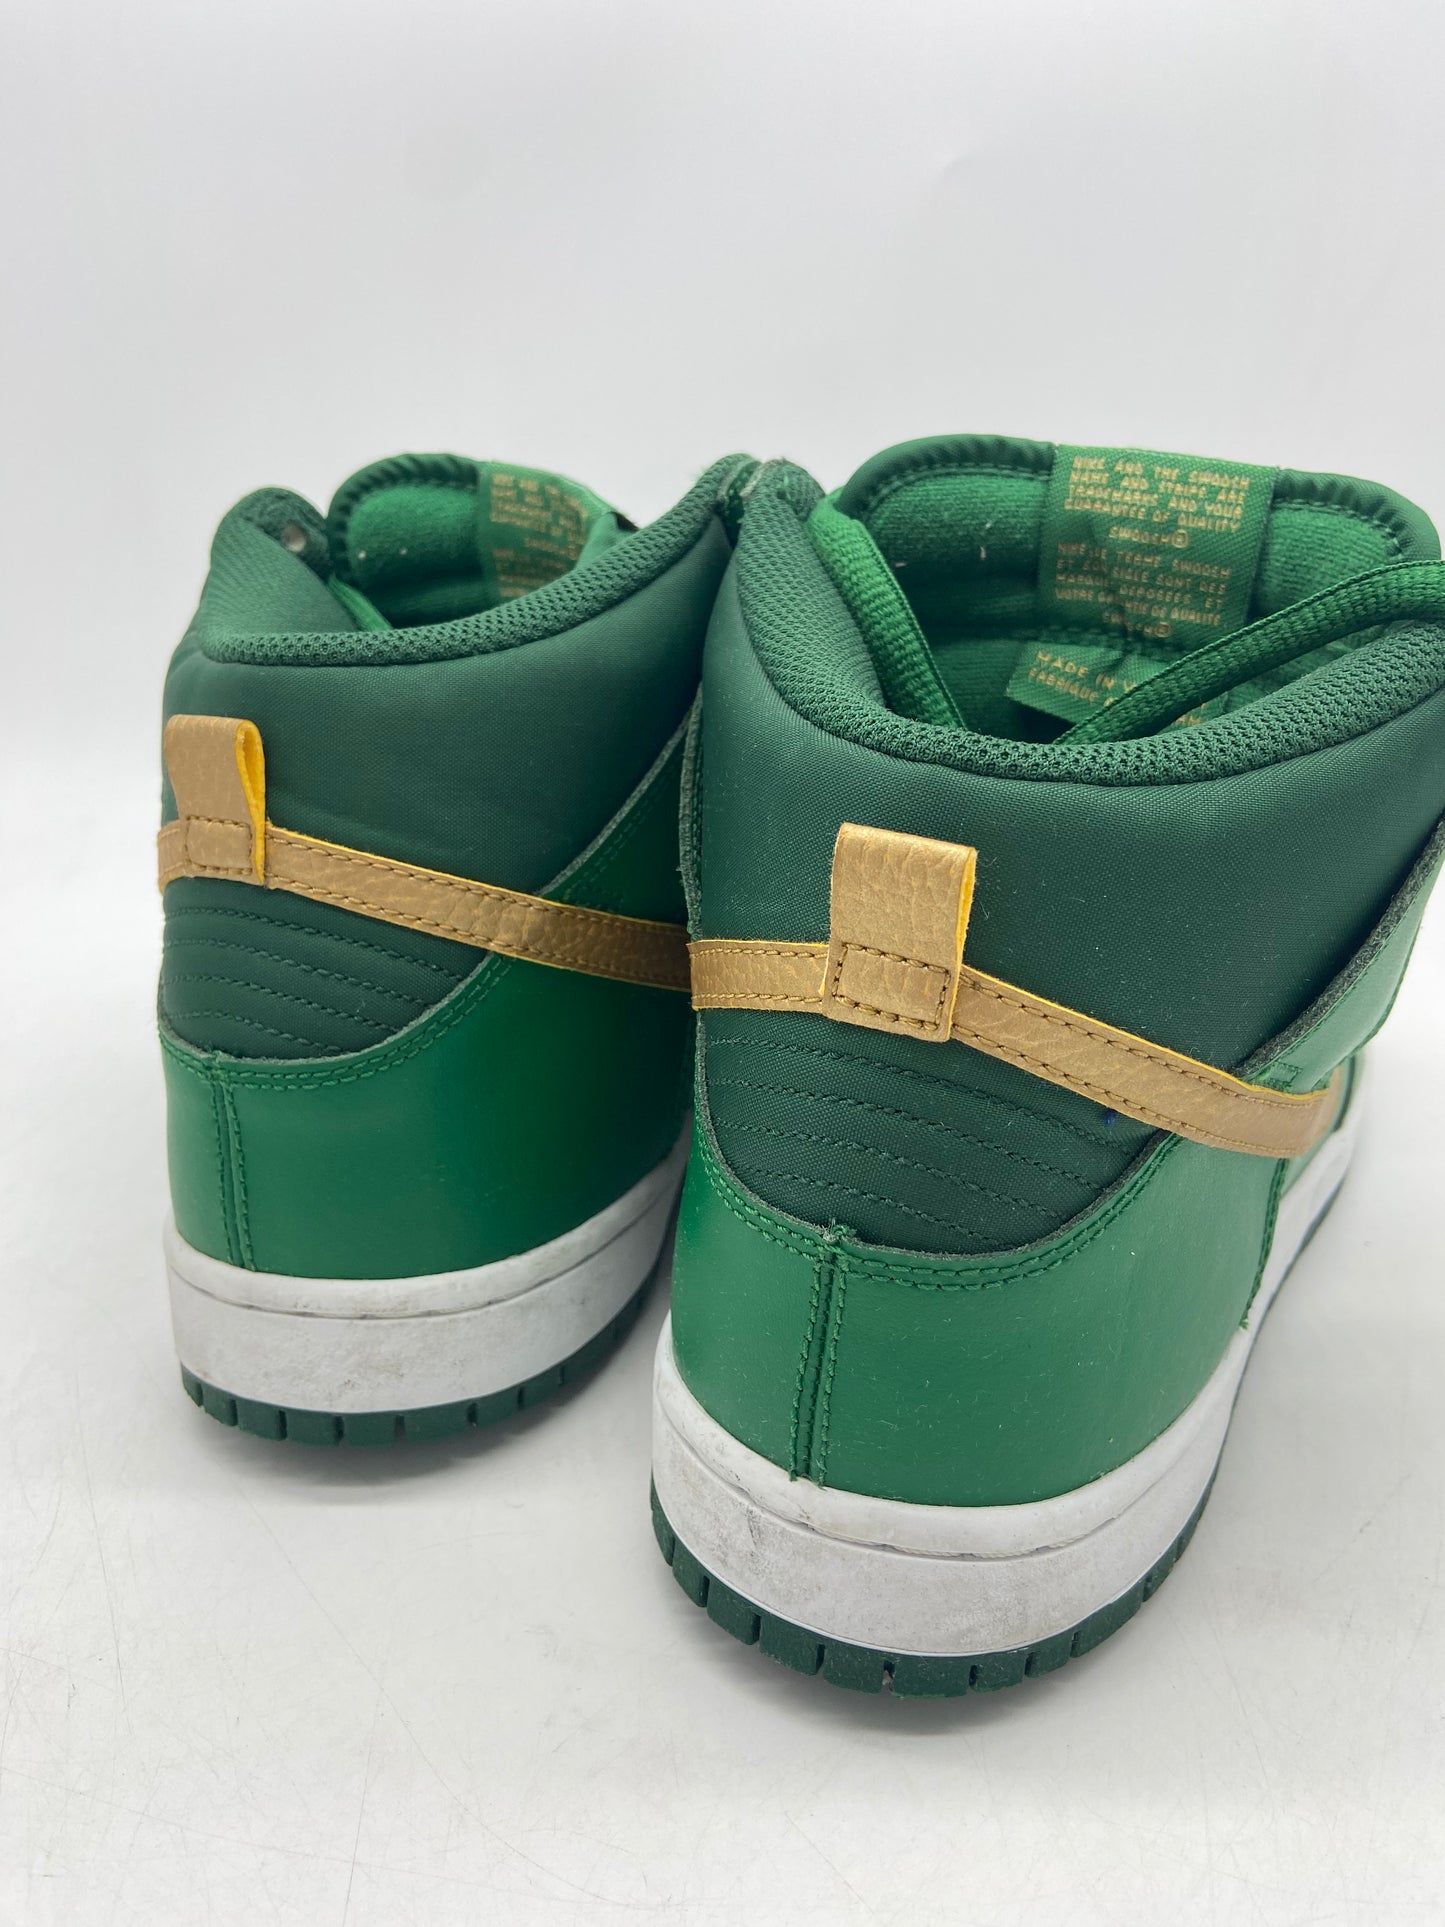 Preowned 2013 Nike SB Dunk High St Patty's Day Sz 9M/10.5W (305050-373)